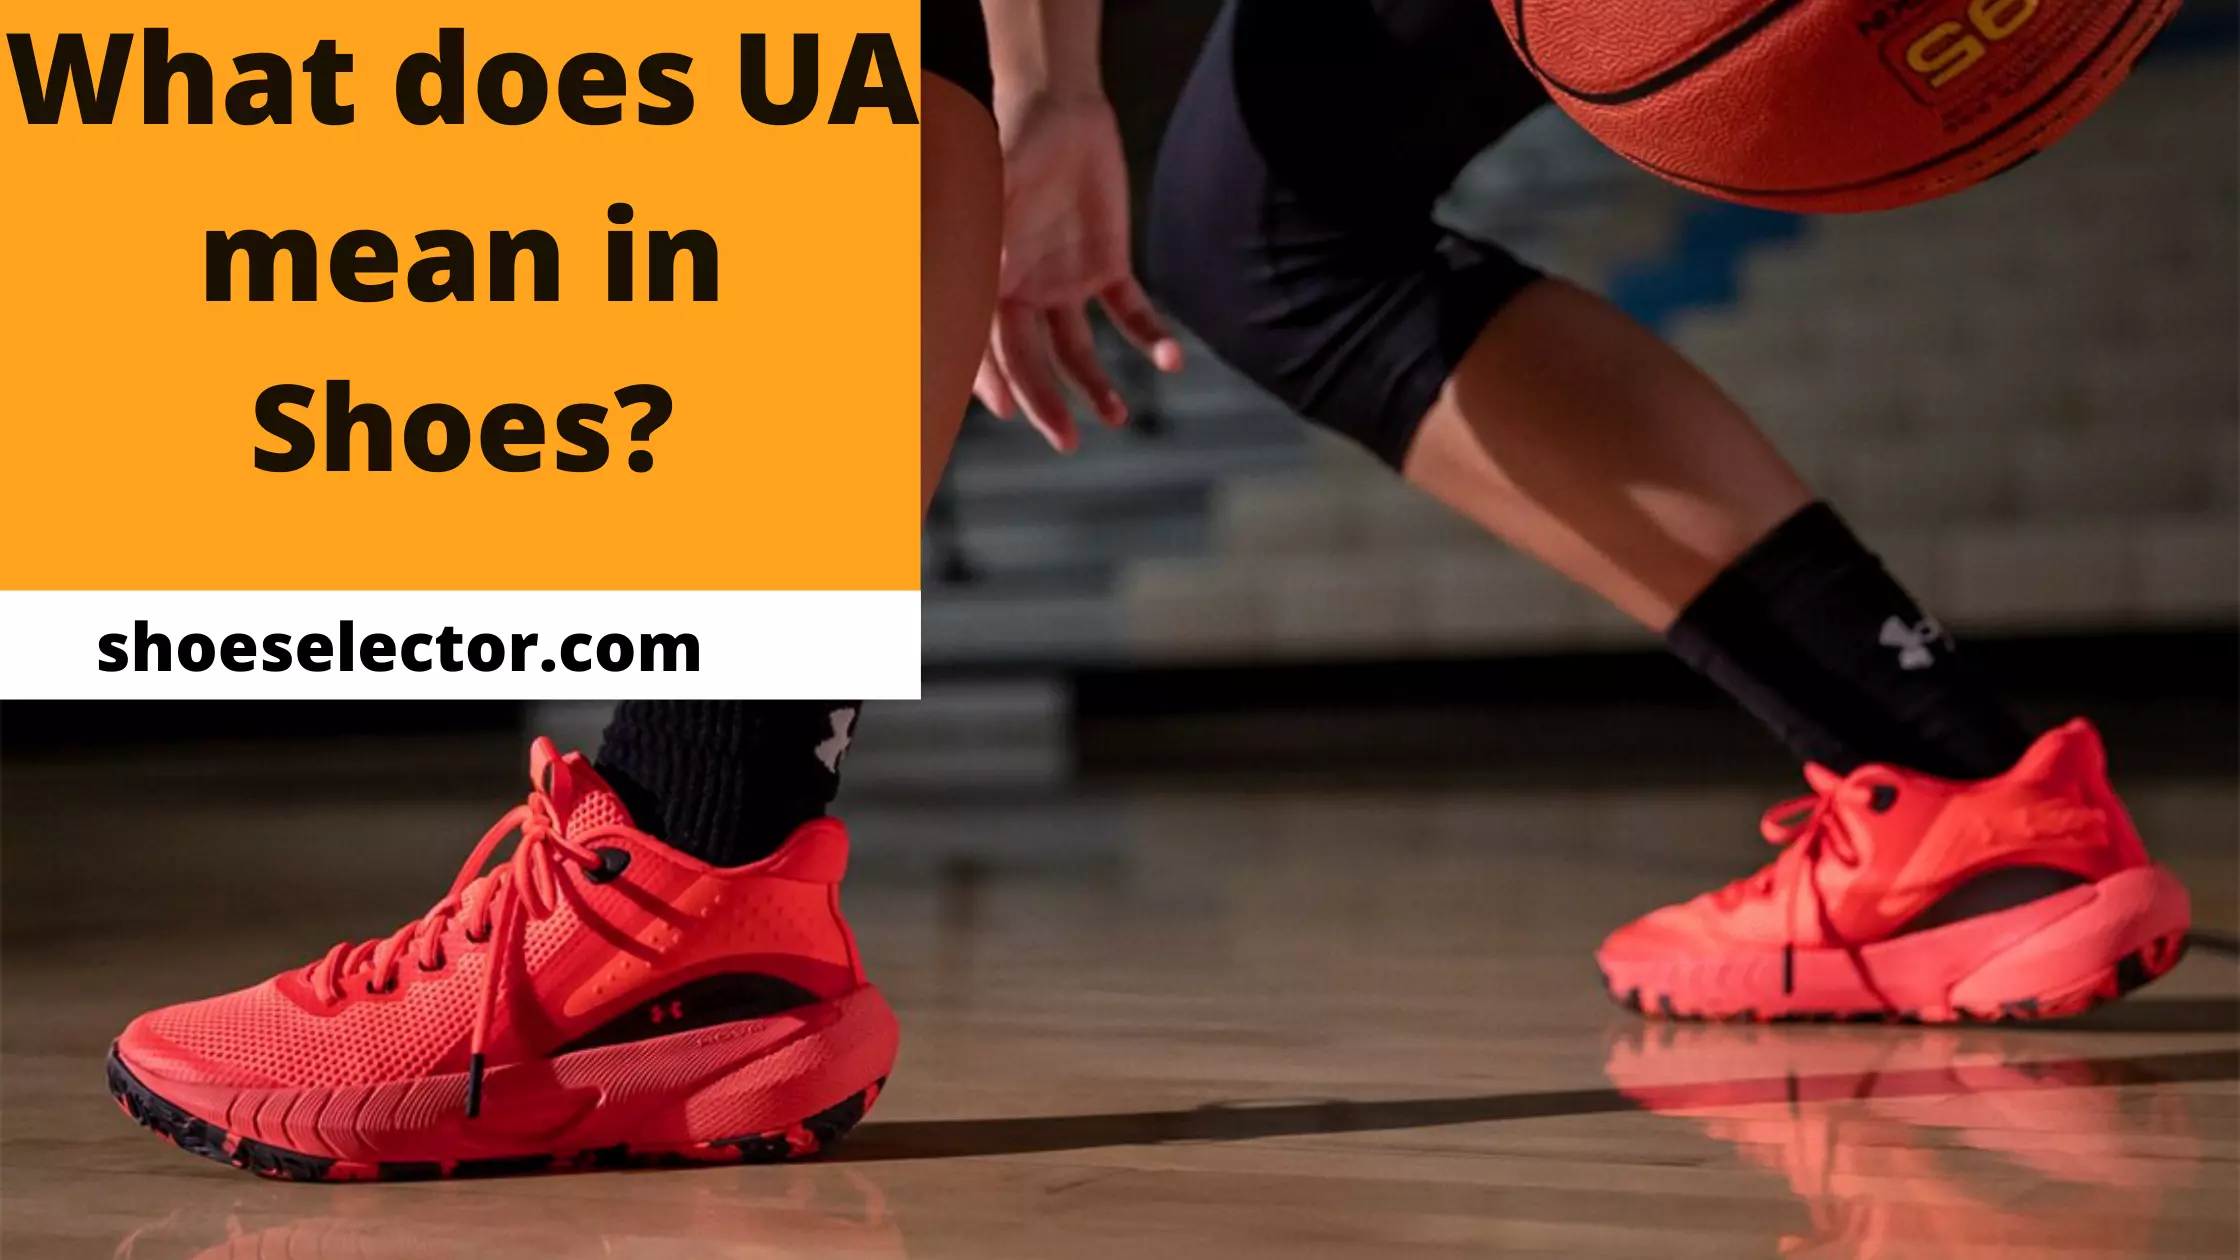 What Does UA Mean In Shoes? - Quick Guide